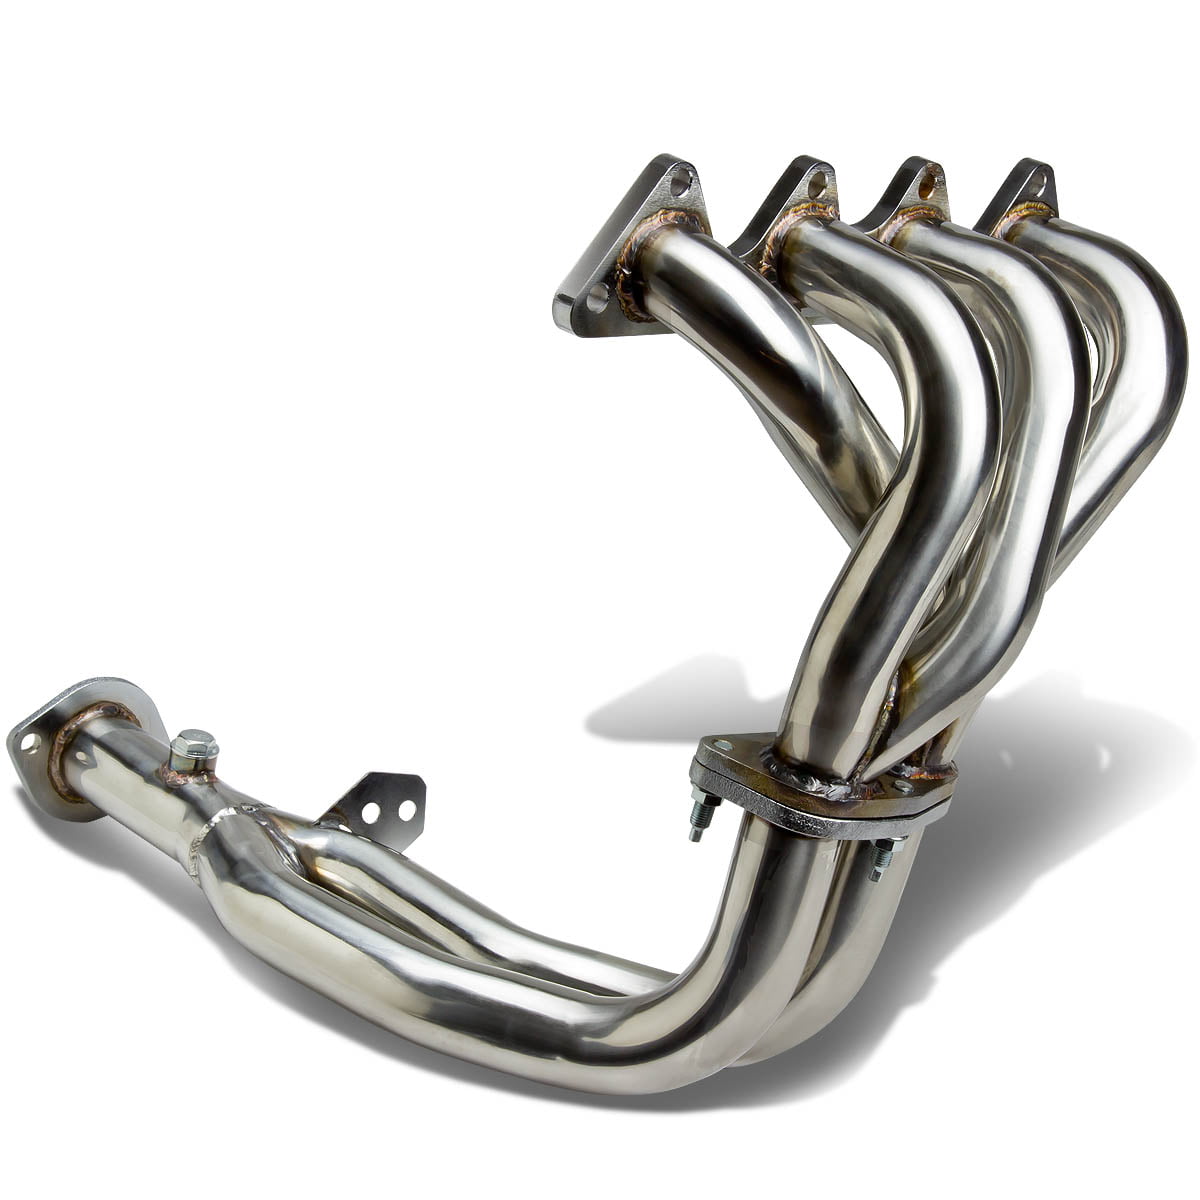 For Acura Integra DB/DC 1.8L Stainless Steel Ram-Horn Exhaust Manifold Header w/Megaphone 